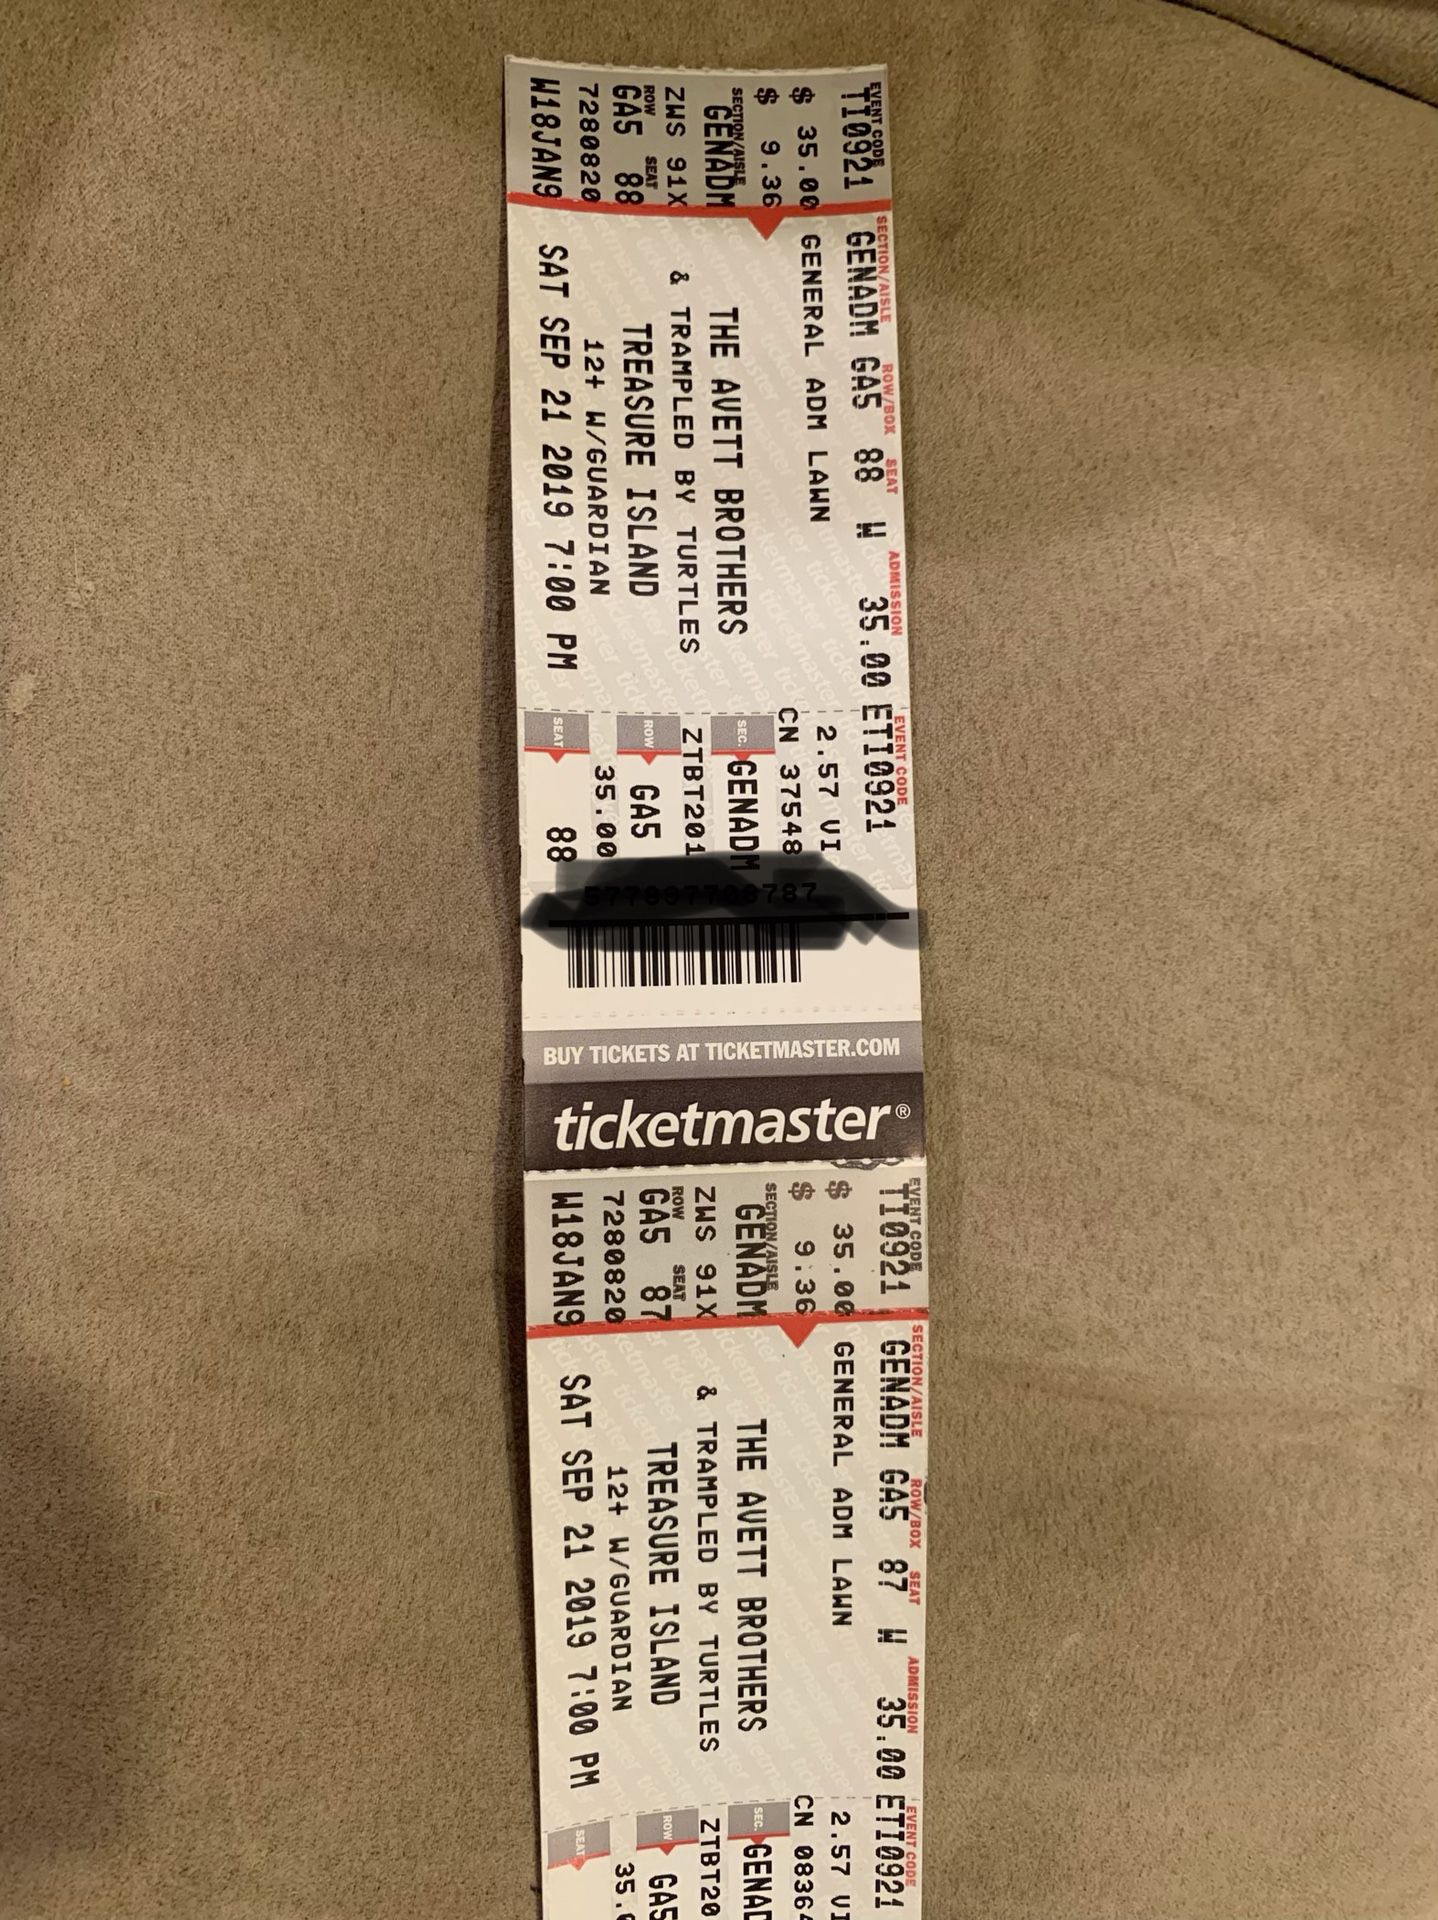 Two General Admission Avett Brothers/Trampled by Turtles tickets for Saturday, 9/21 at Treasure Island Casino. They were over $100 for both